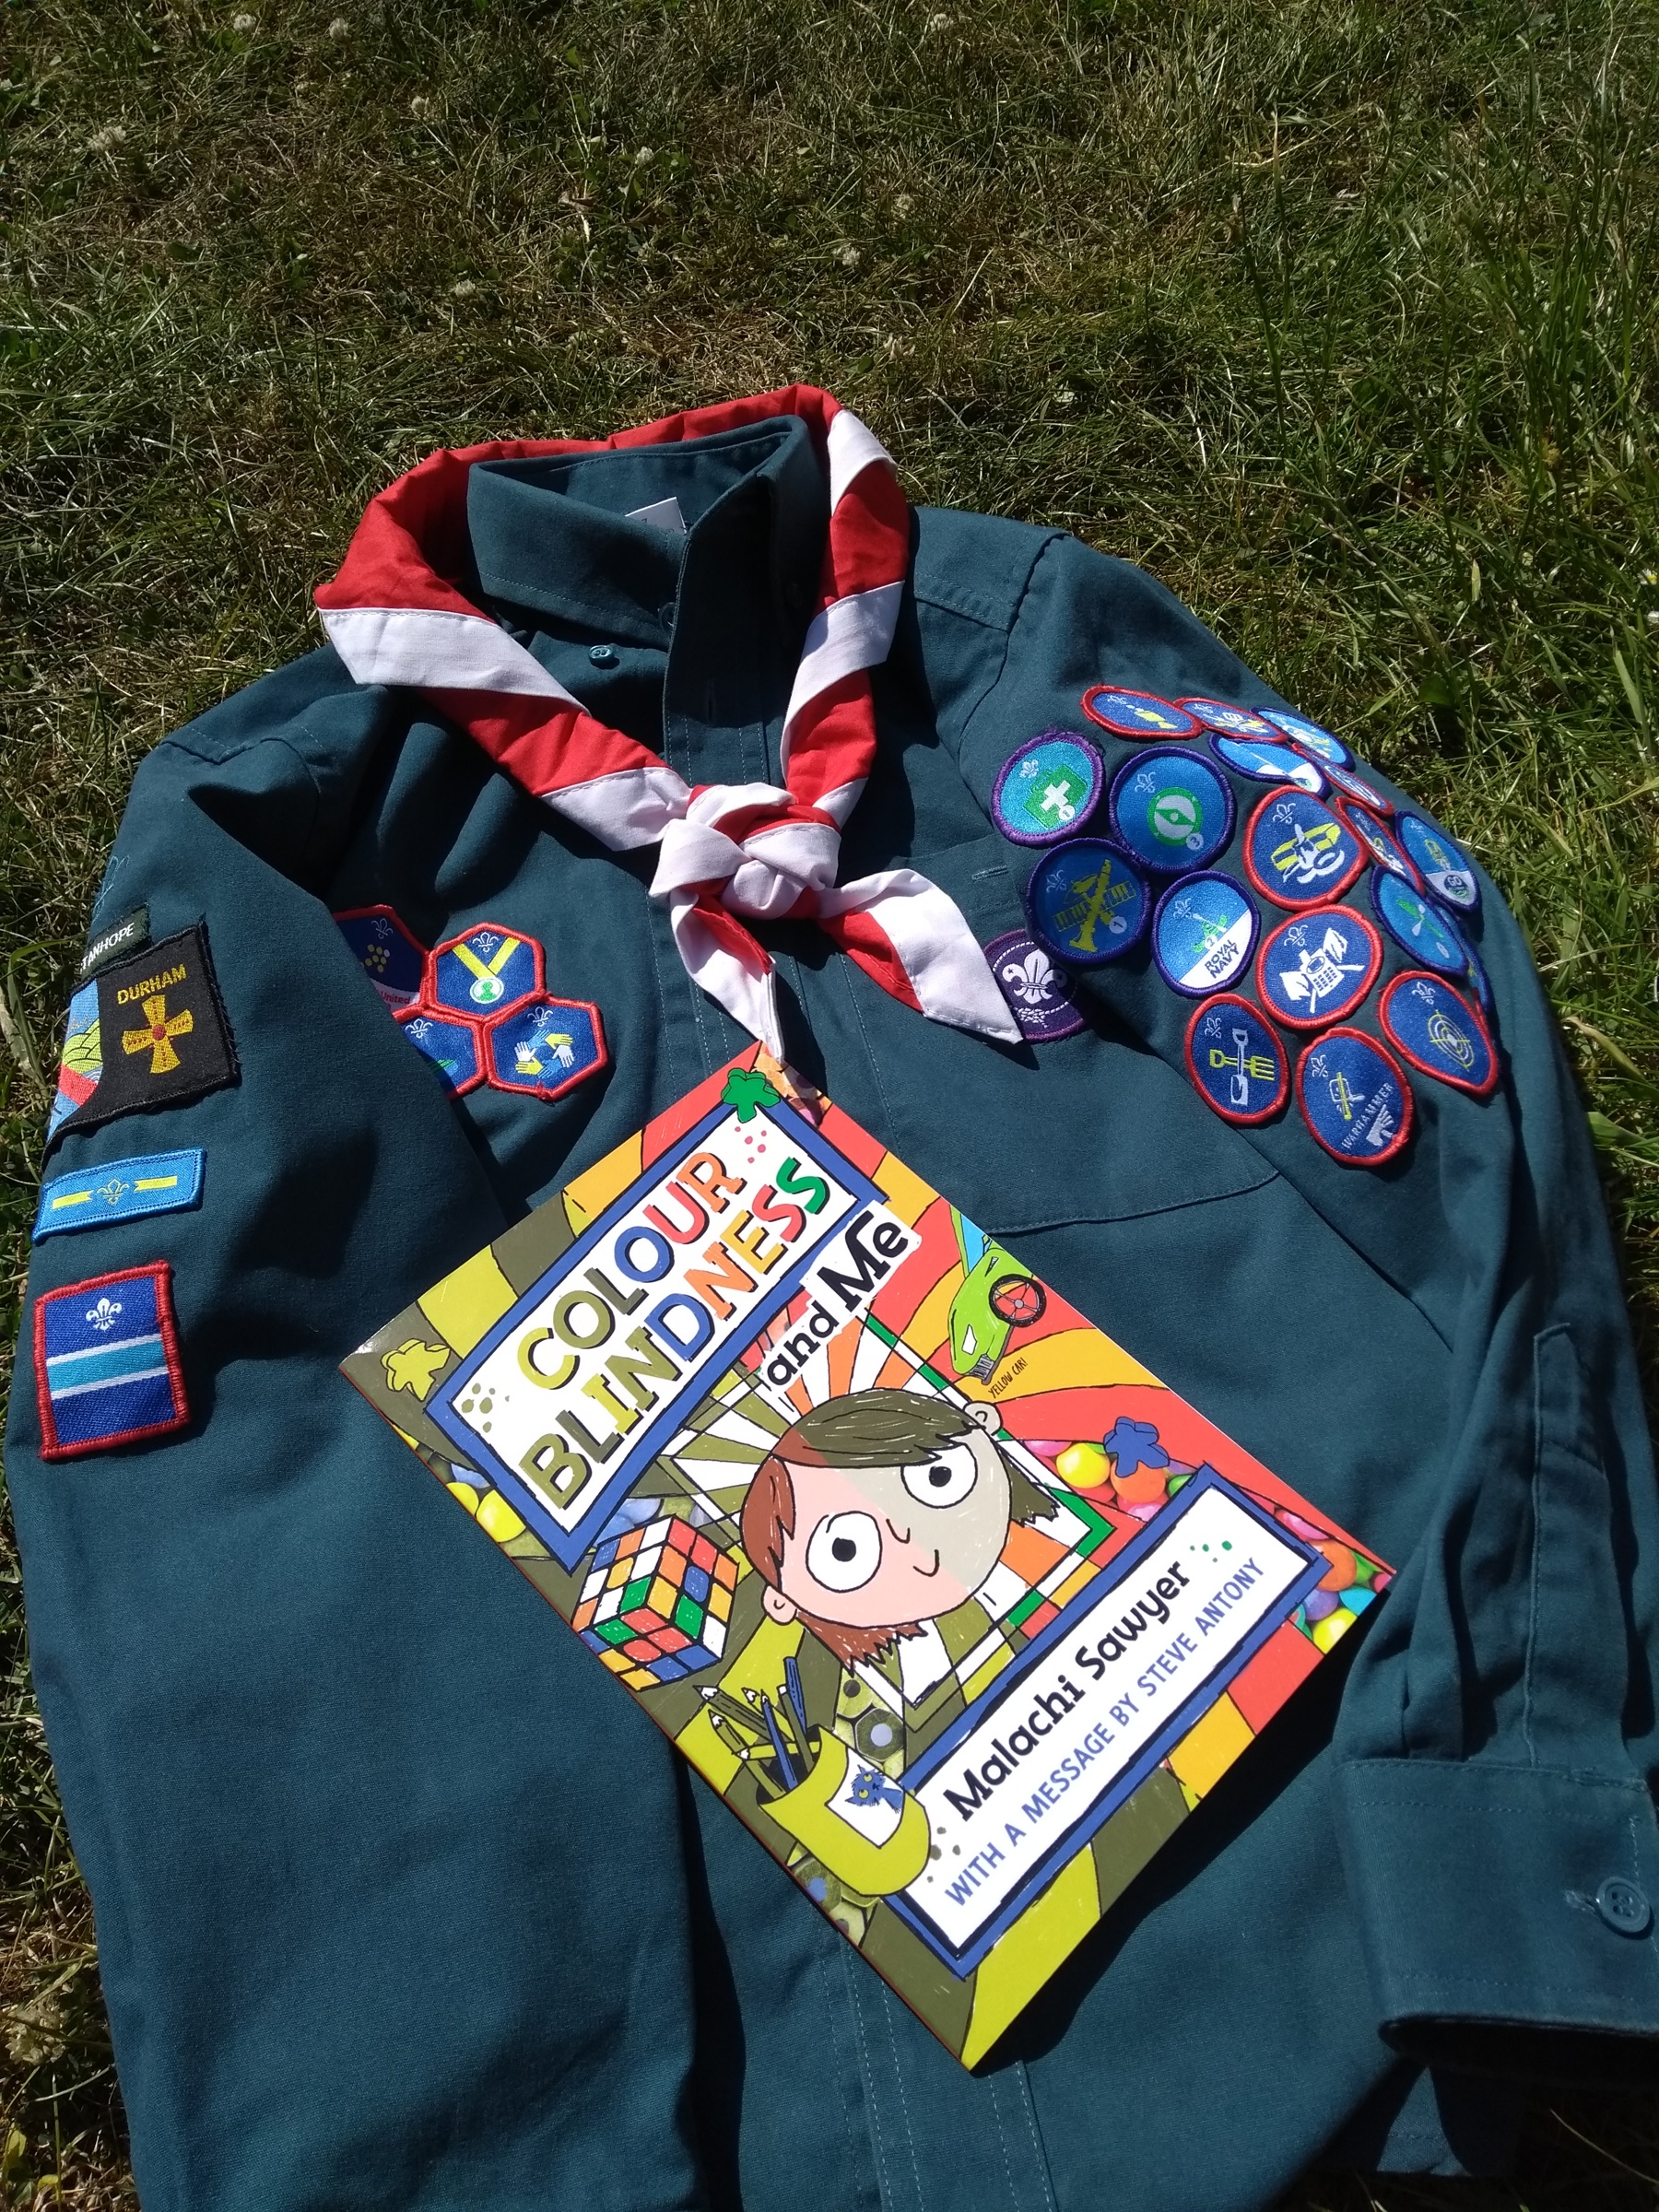 A Scout shirt is laid out on grass with a red and white necker around the colour. There are lots of badges sewn onto the shirt and the book by 12-year-old Malachi, 'Colour Blindness and Me,' is laying on top of the shirt.